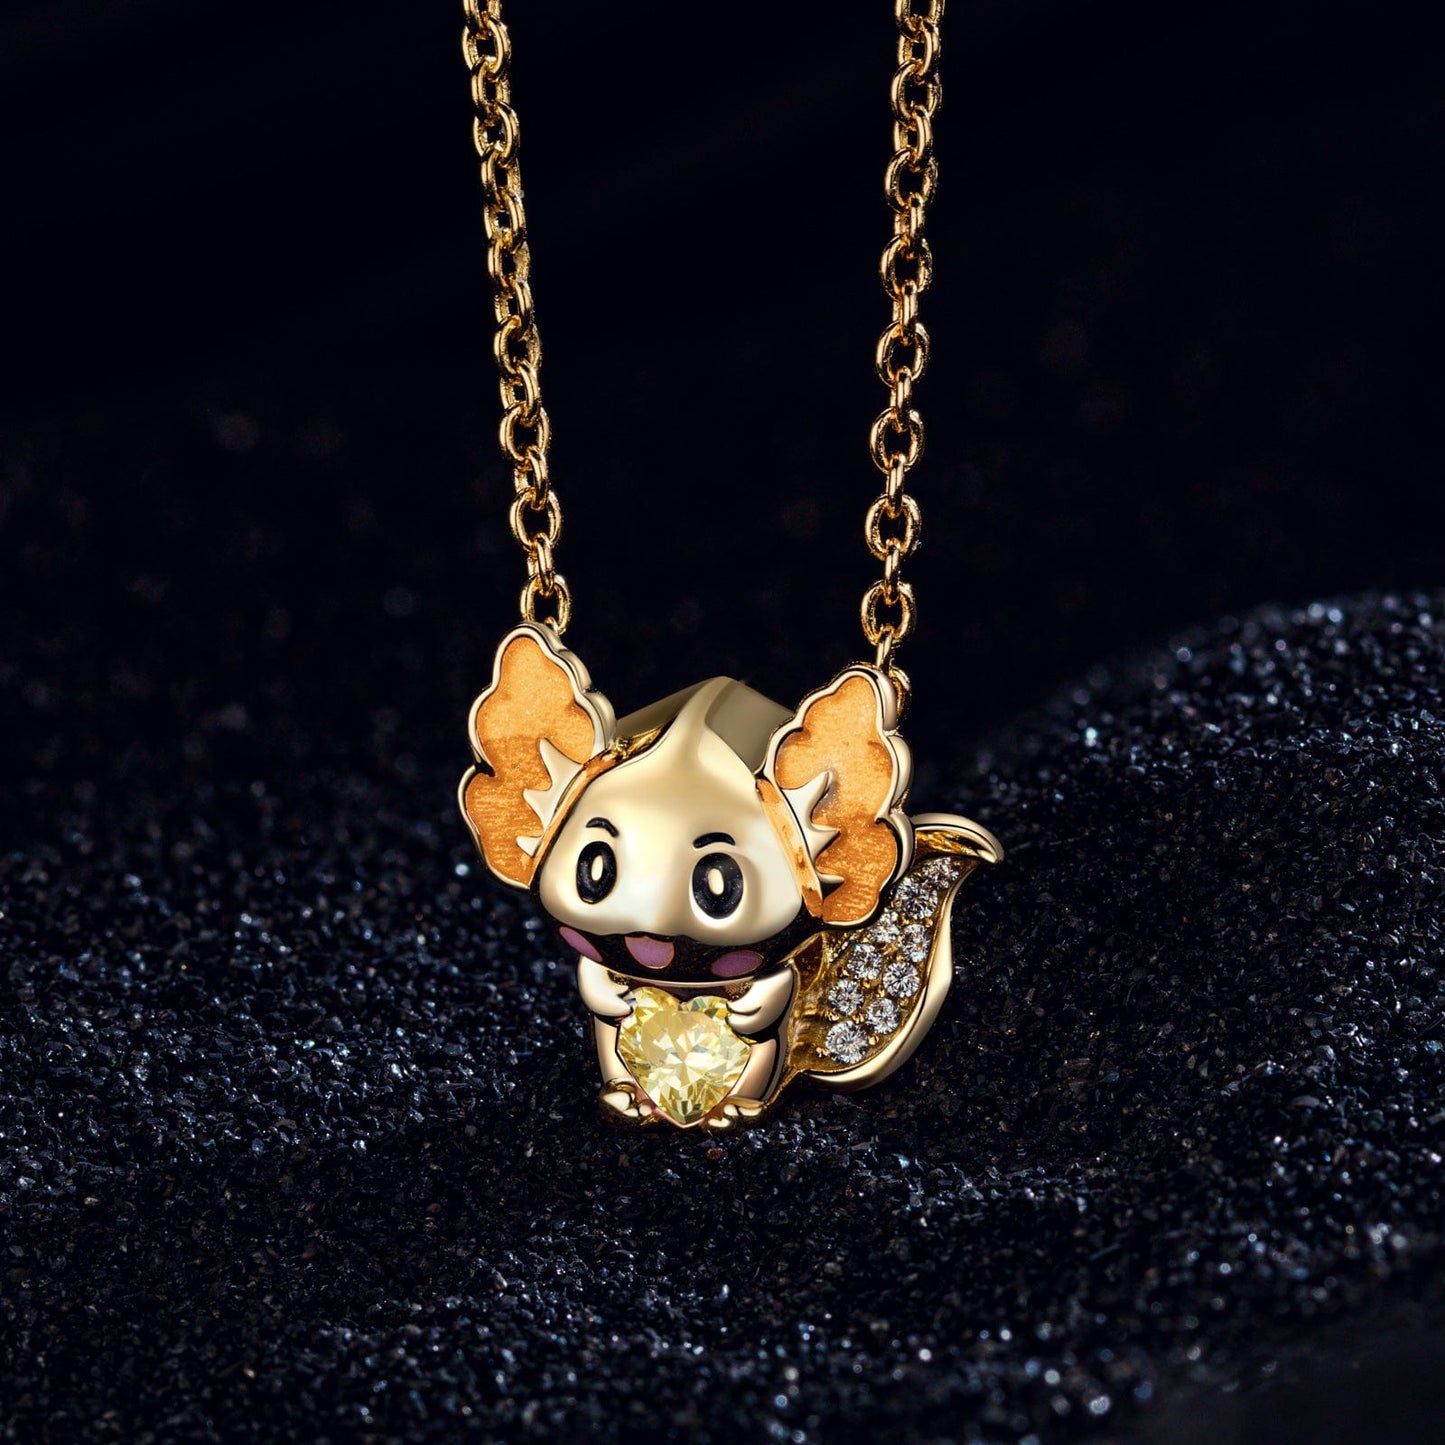 Lovely Axolotl Birthstone Tarnish-resistant Silver Charms With Enamel In 14K Gold Plated - Heartful Hugs Collection